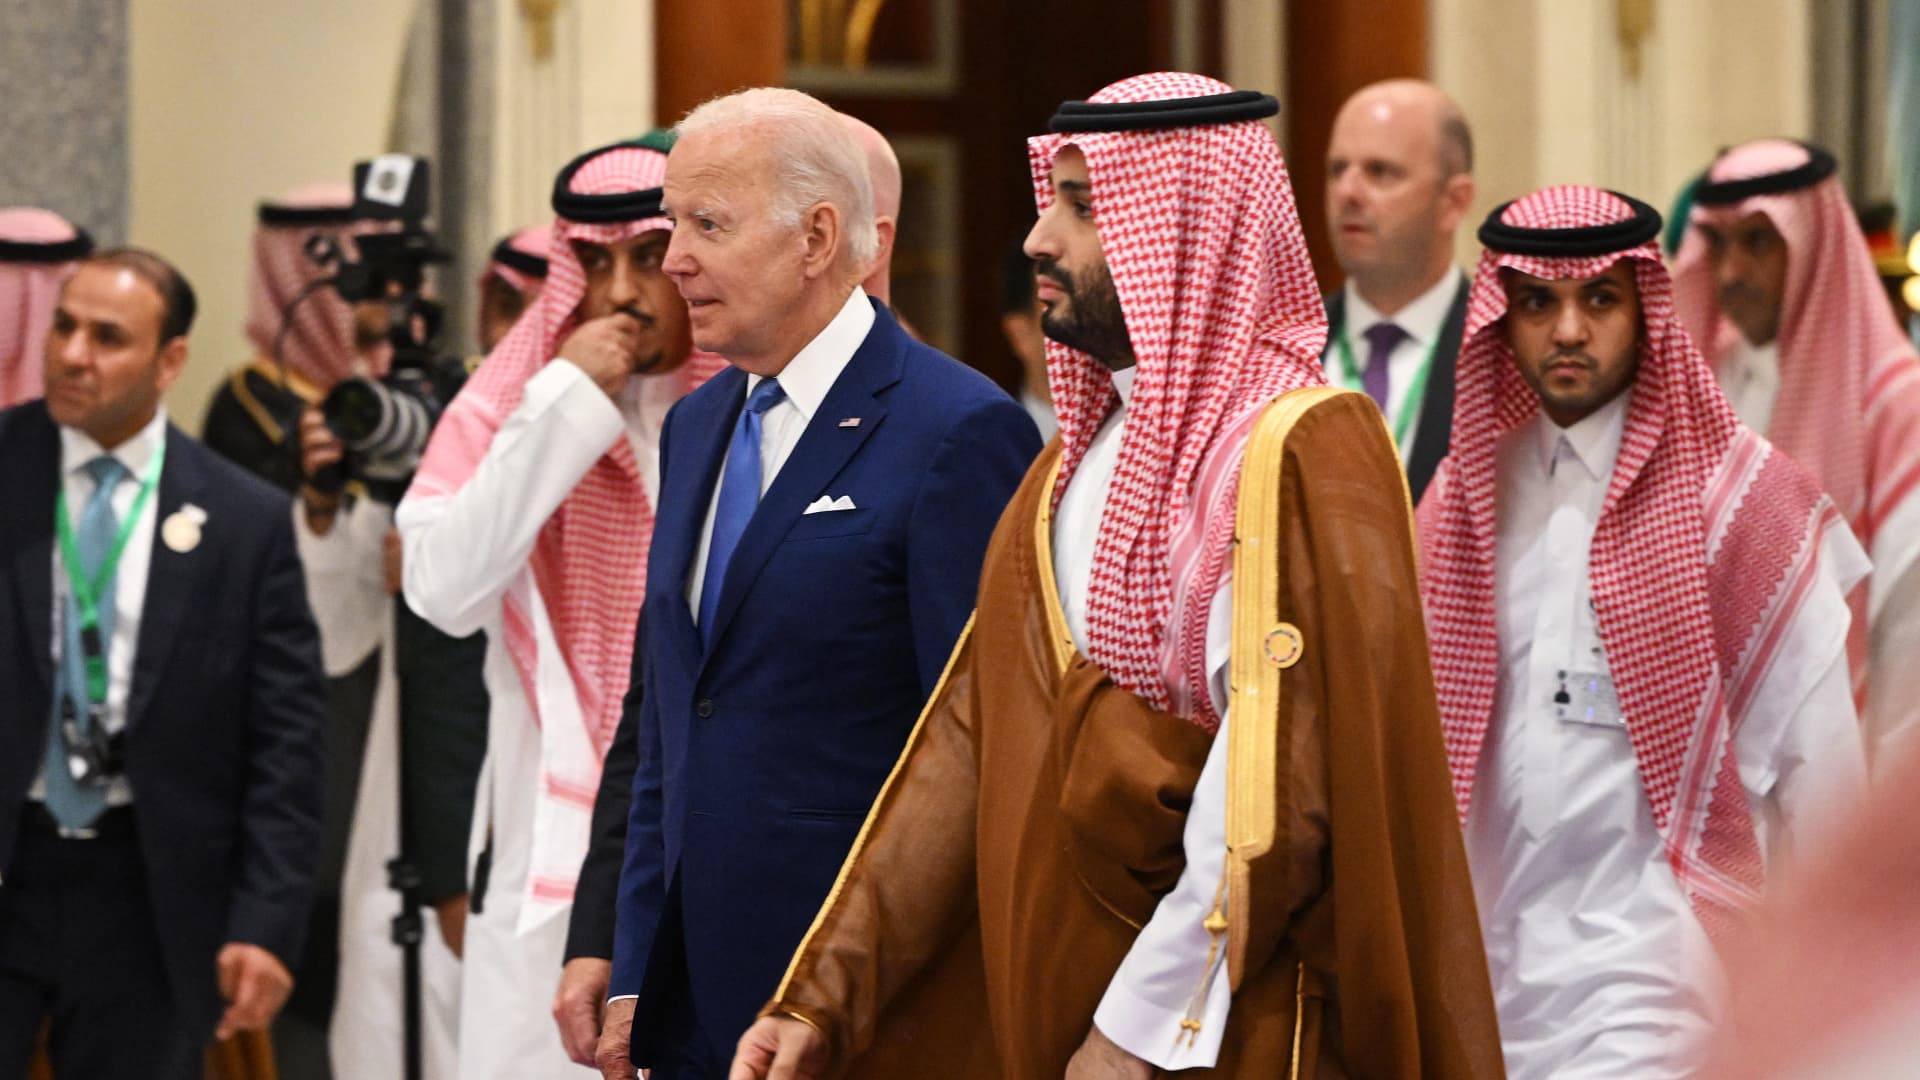 Biden threatens 'consequences' for Saudi Arabia after OPEC cut, but his options are limited